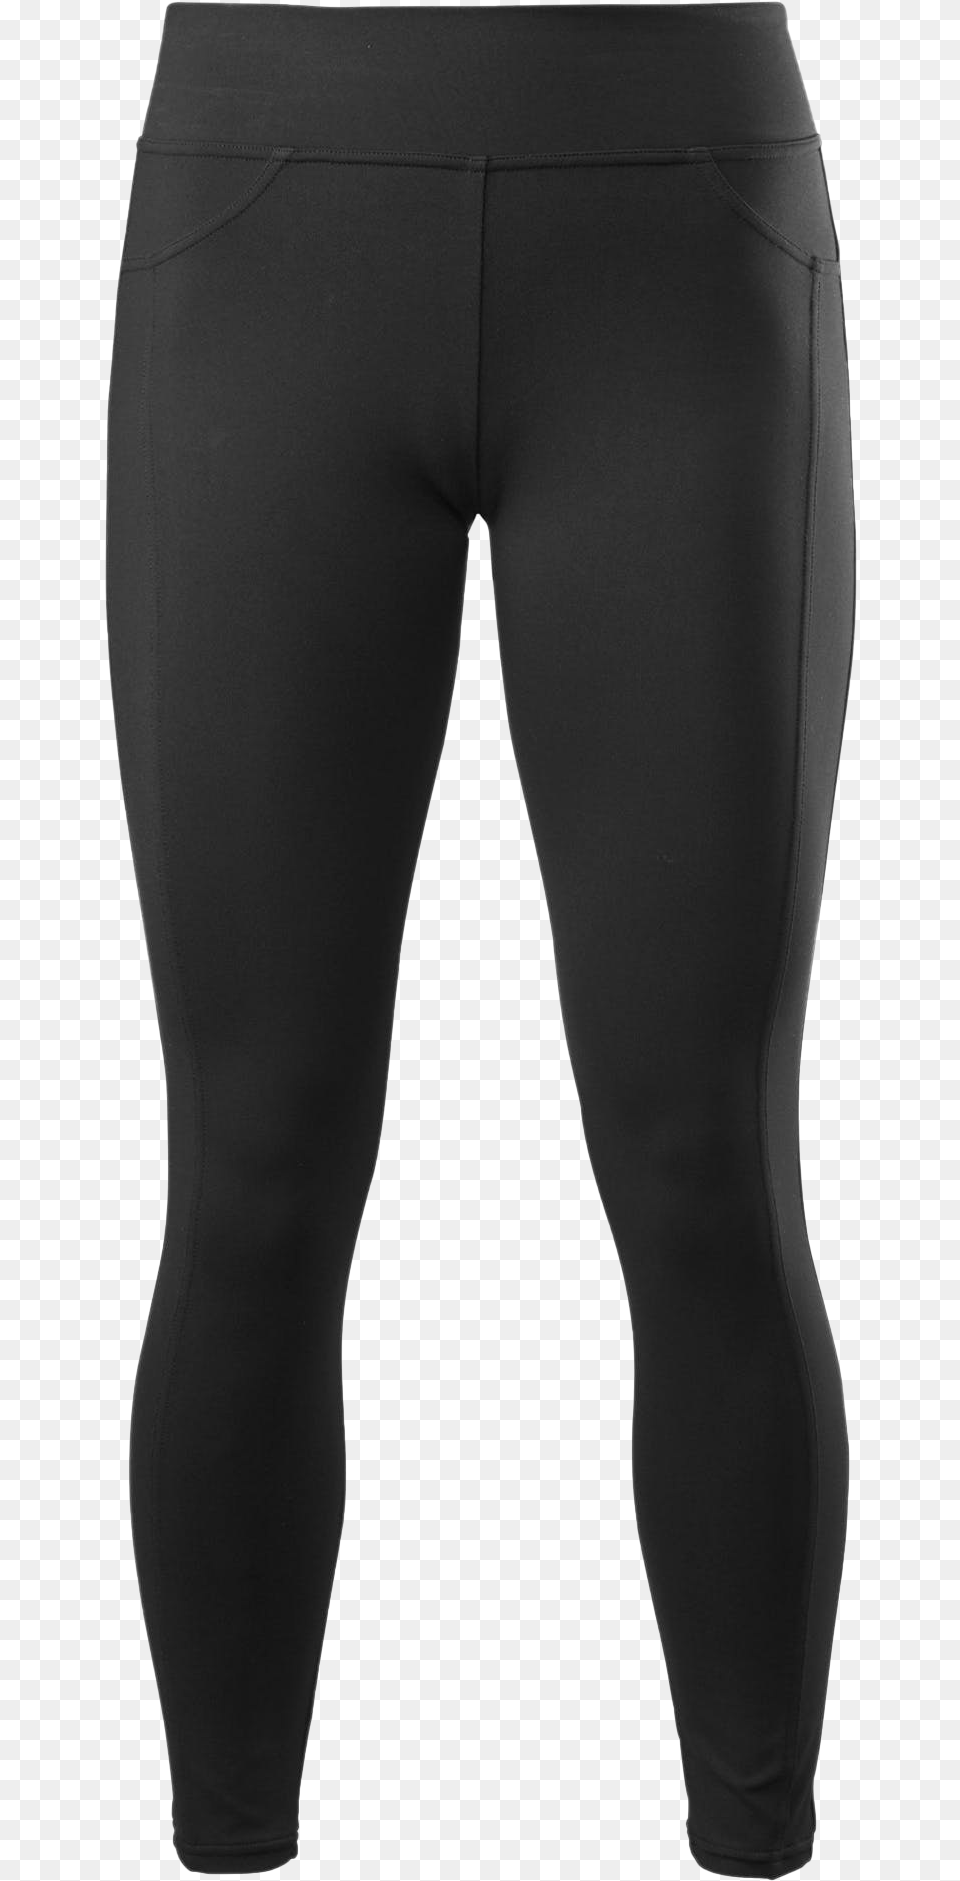 Leggings Transparent Image Under Armor Clothing, Pants, Hosiery, Tights Png